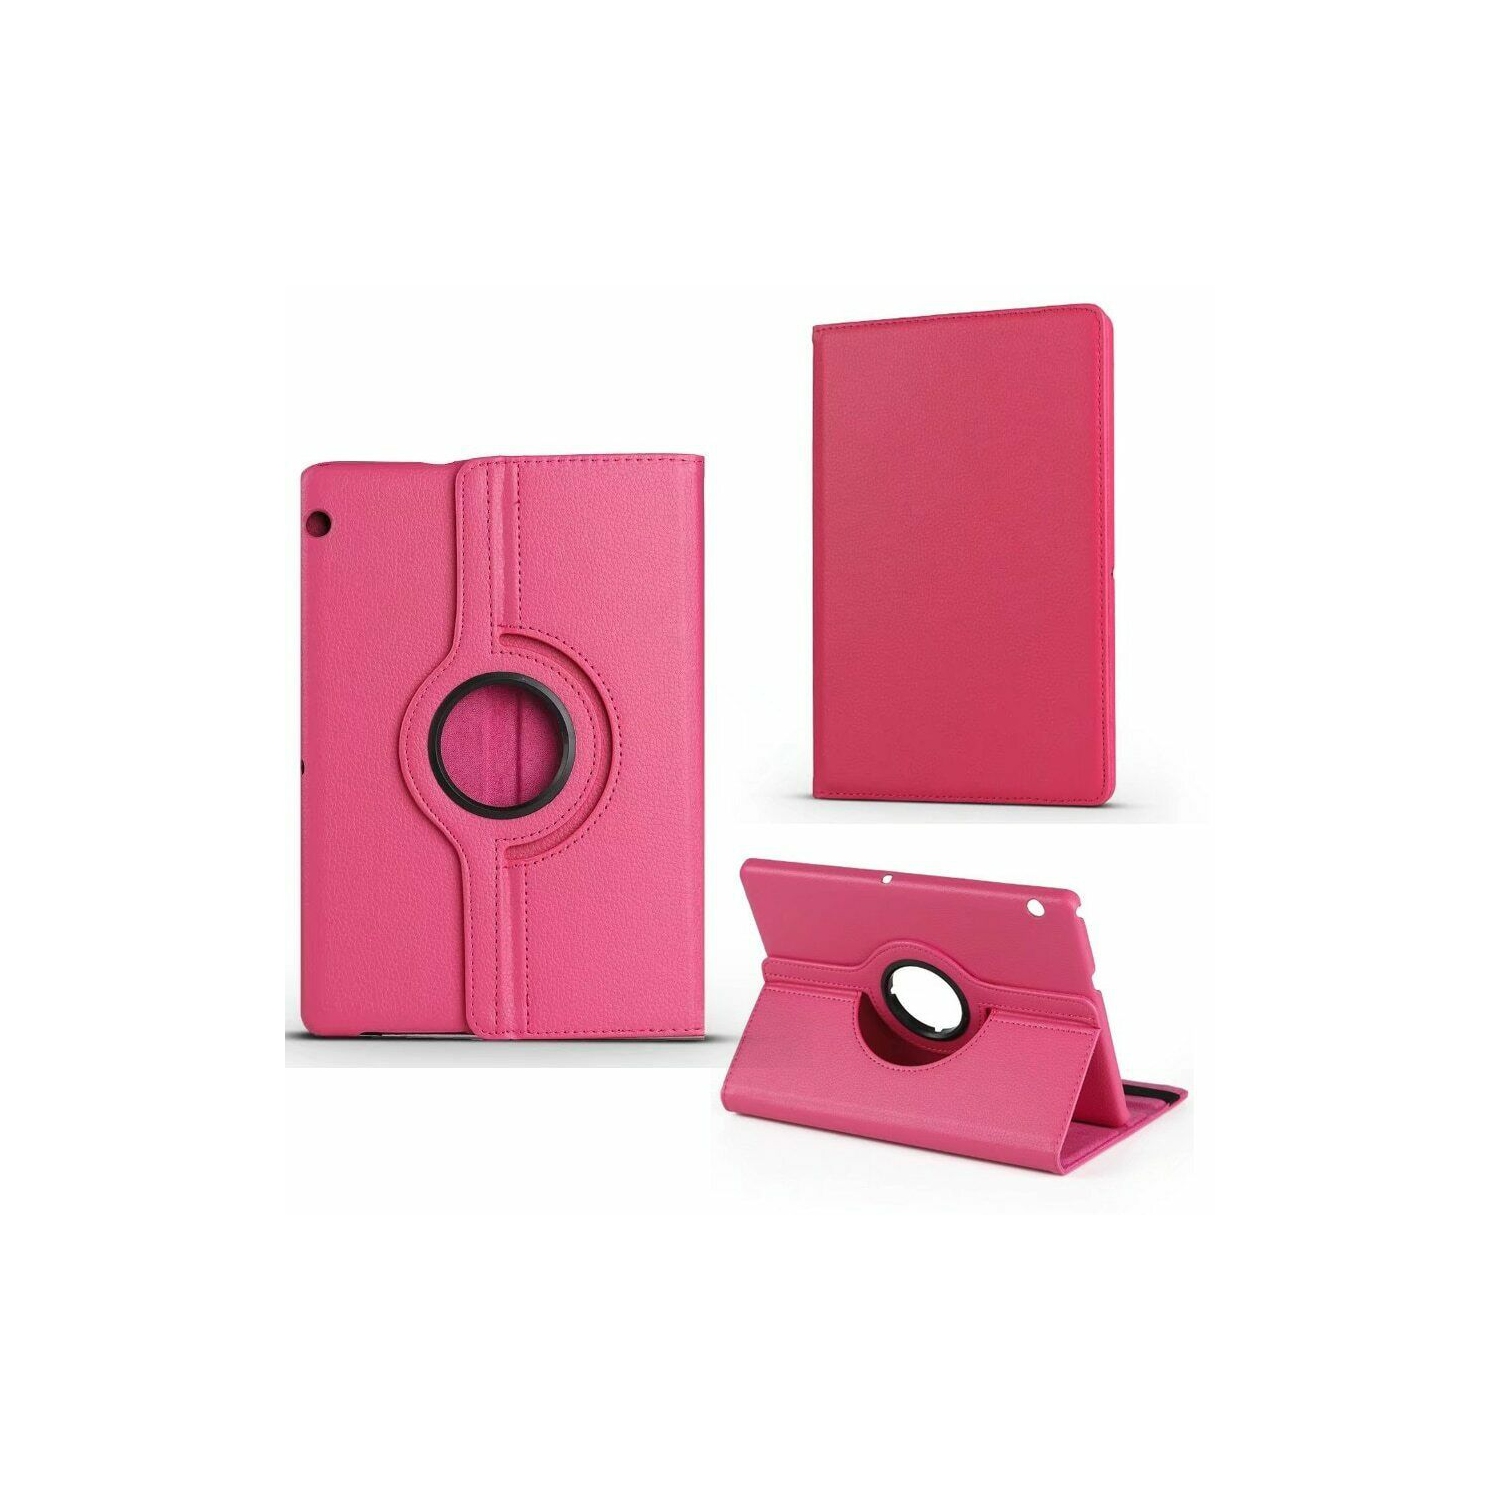 【CSmart】 360 Rotating PU Leather Stand Case Smart Cover for Huawei Mediapad T5 10 10.1", Hot Pink